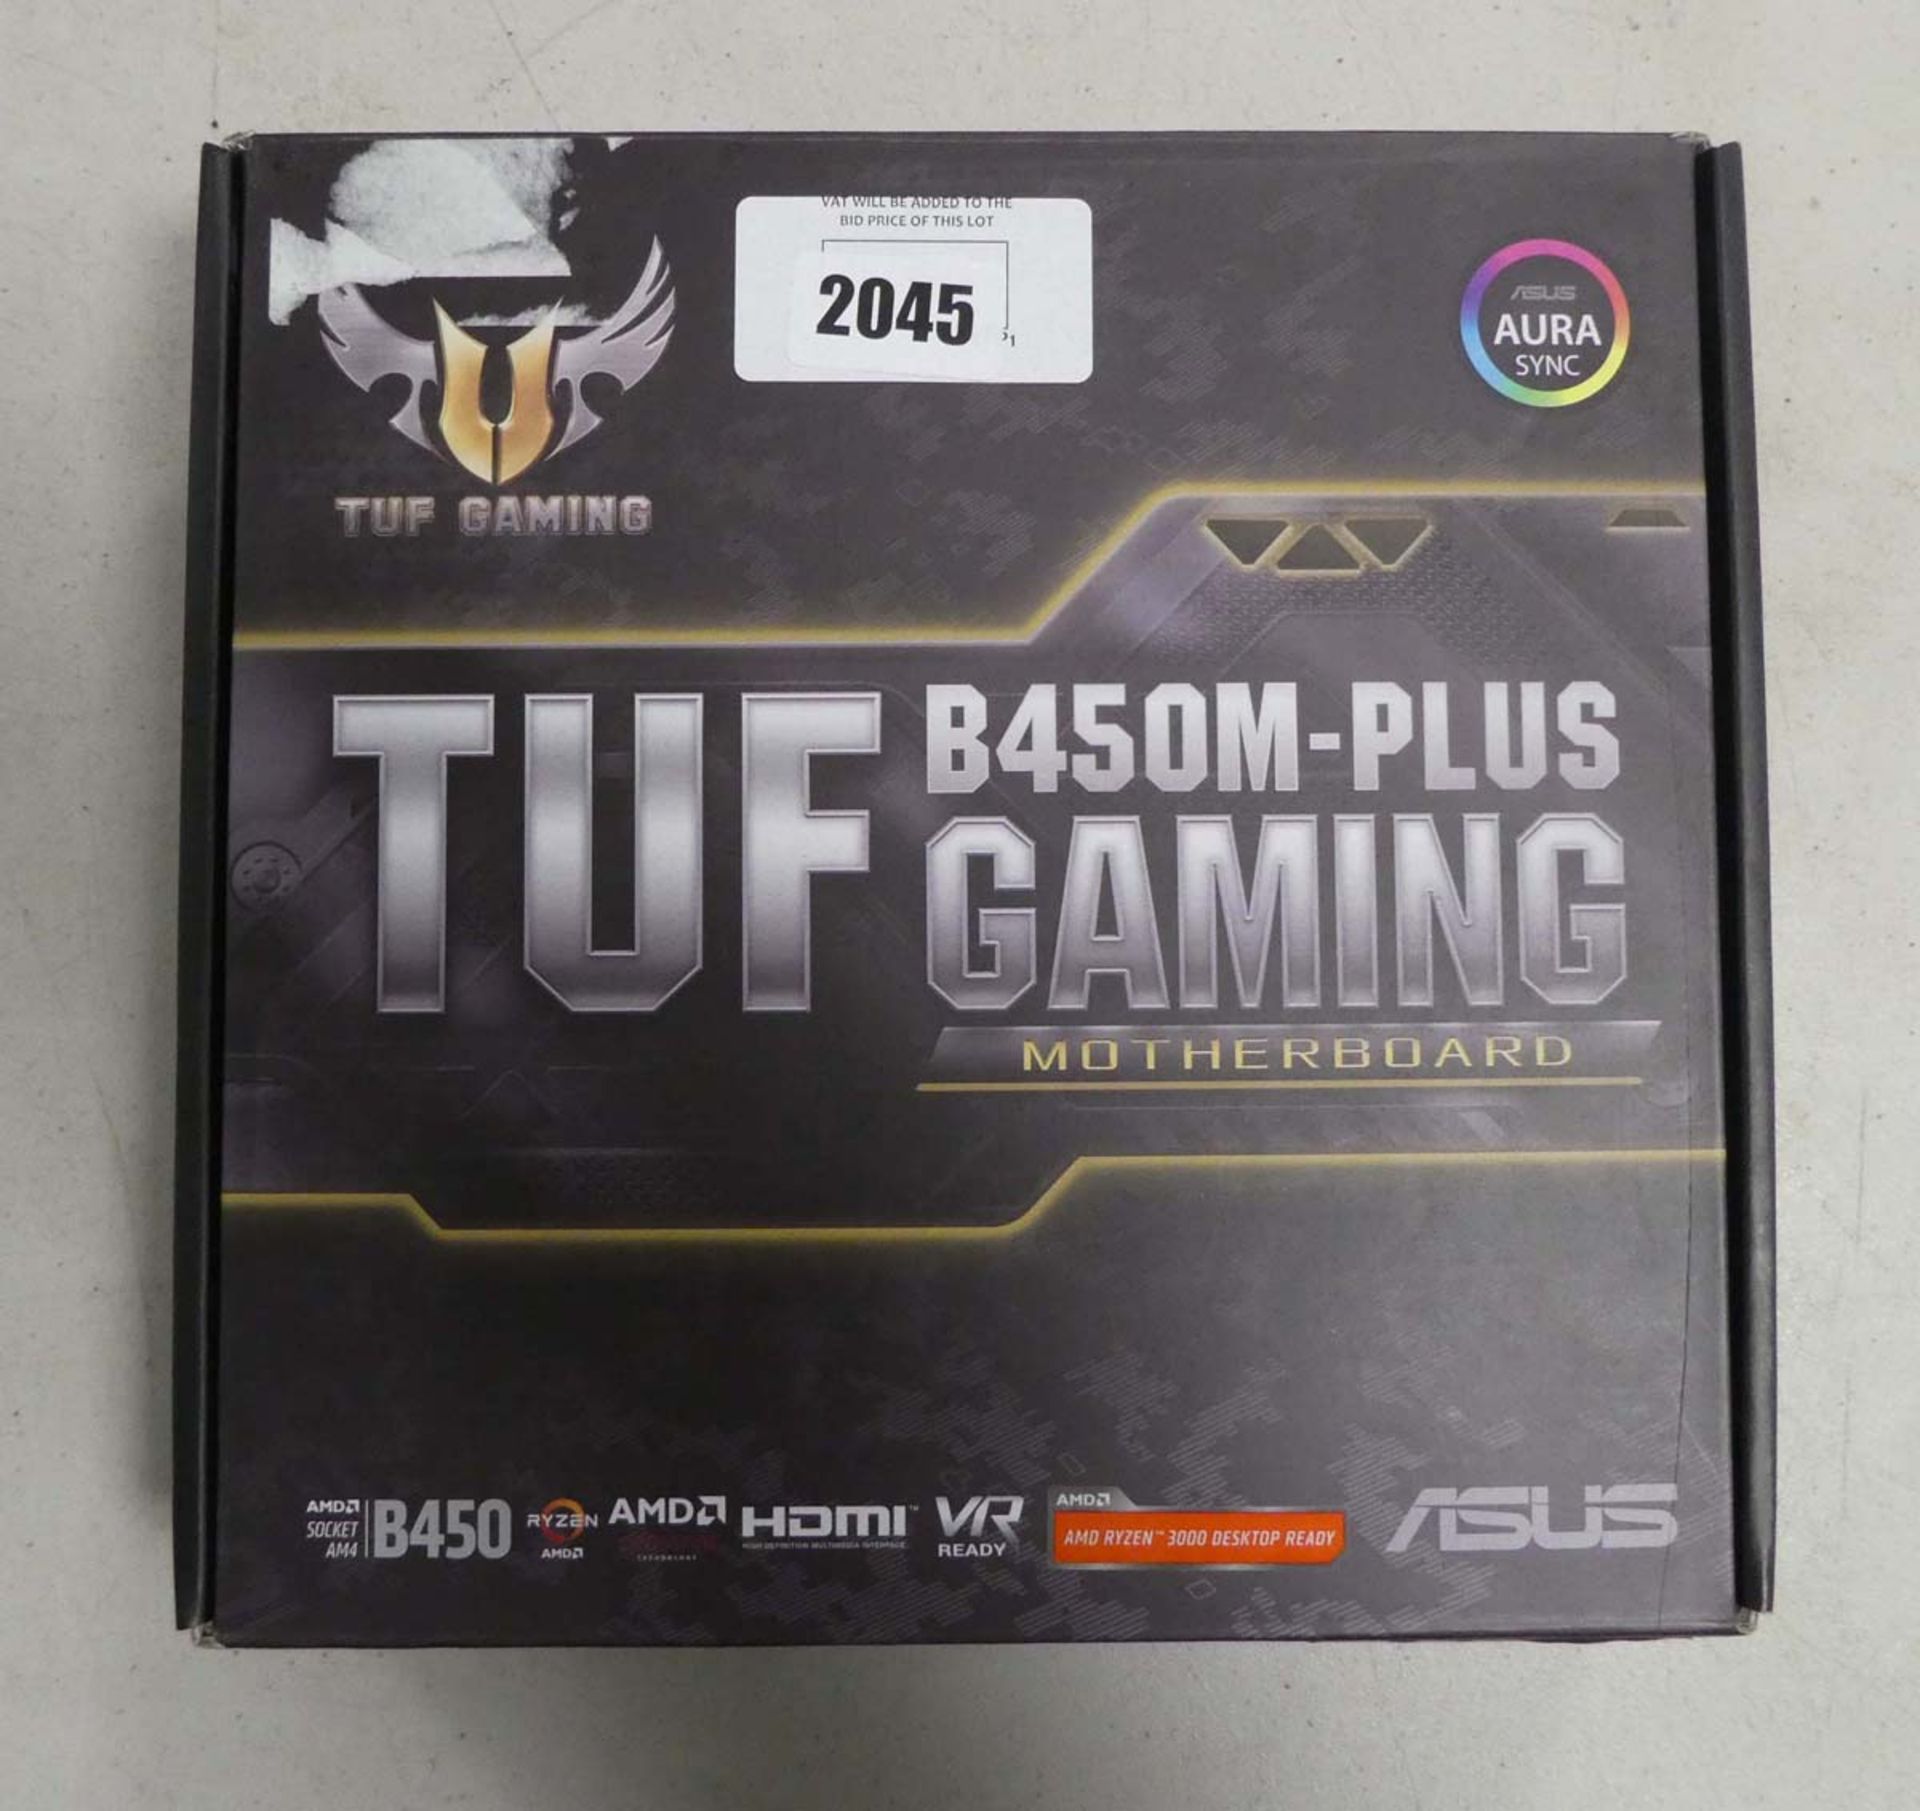 Asus TUFB450M motherboard in box